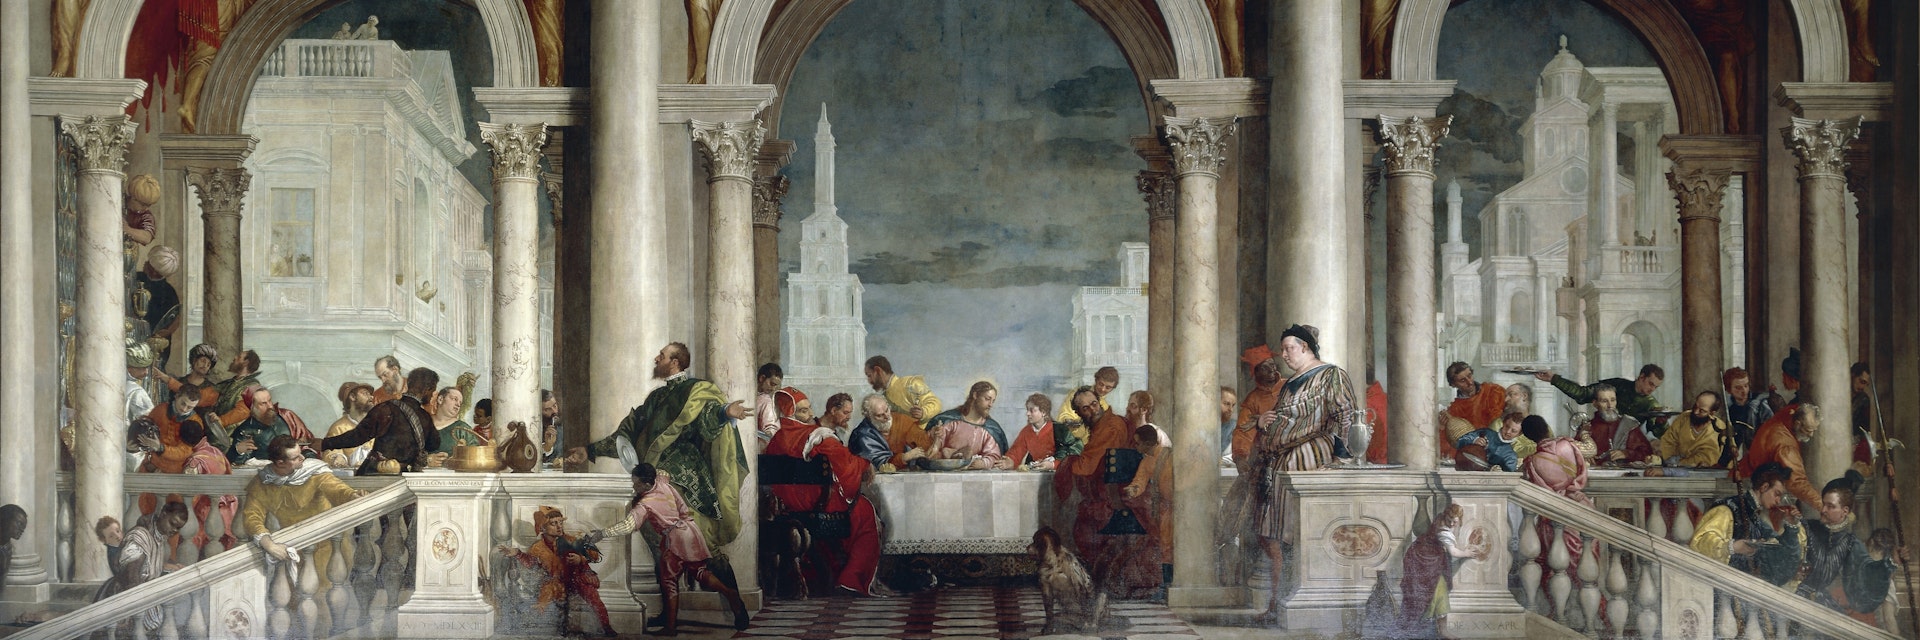 Feast in House of Levi by Paolo Caliari known as Veronese (1528-1588), 555x1280 cm, 1563